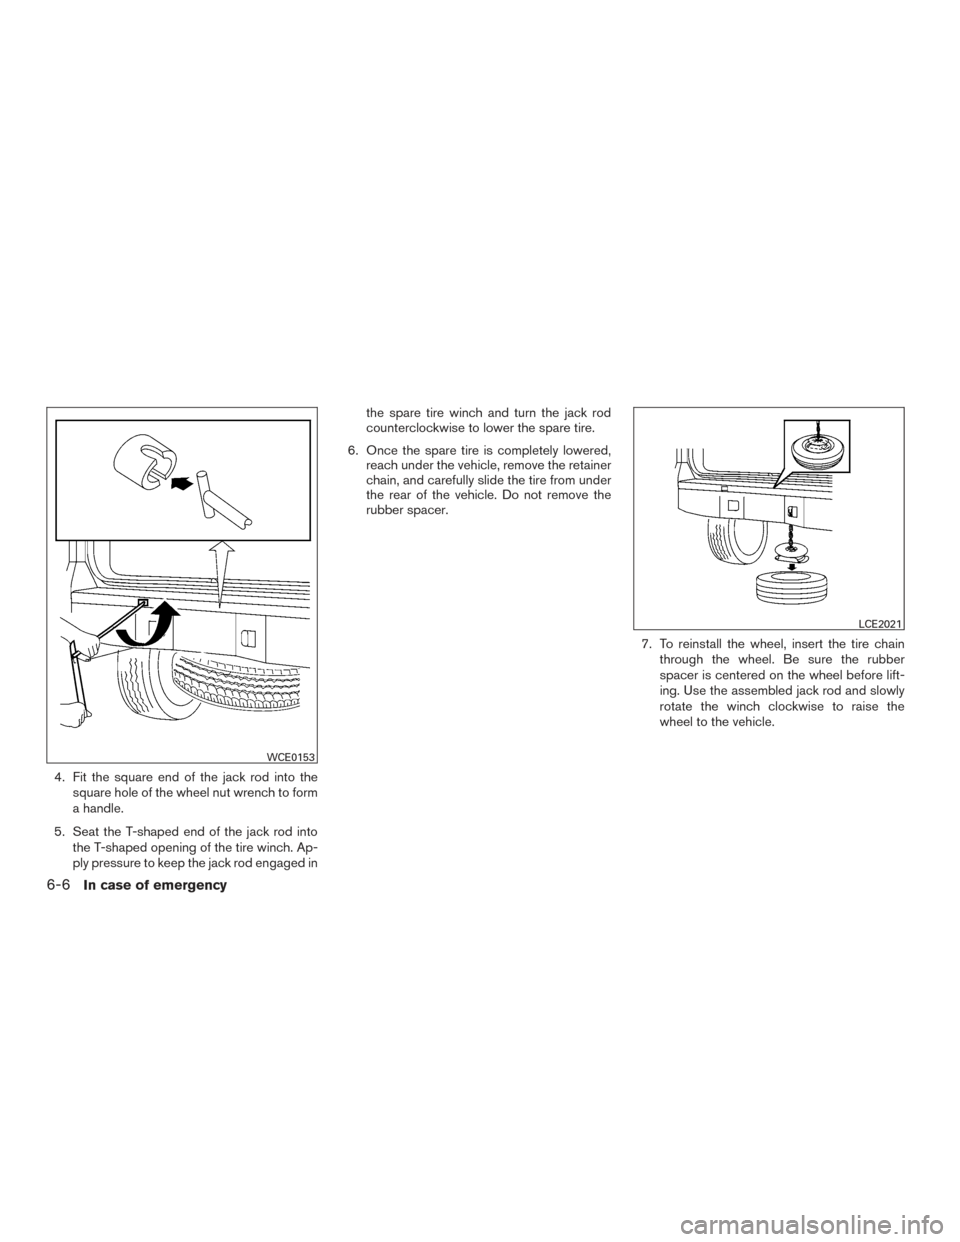 NISSAN XTERRA 2015 N50 / 2.G Owners Manual 4. Fit the square end of the jack rod into thesquare hole of the wheel nut wrench to form
a handle.
5. Seat the T-shaped end of the jack rod into the T-shaped opening of the tire winch. Ap-
ply pressu